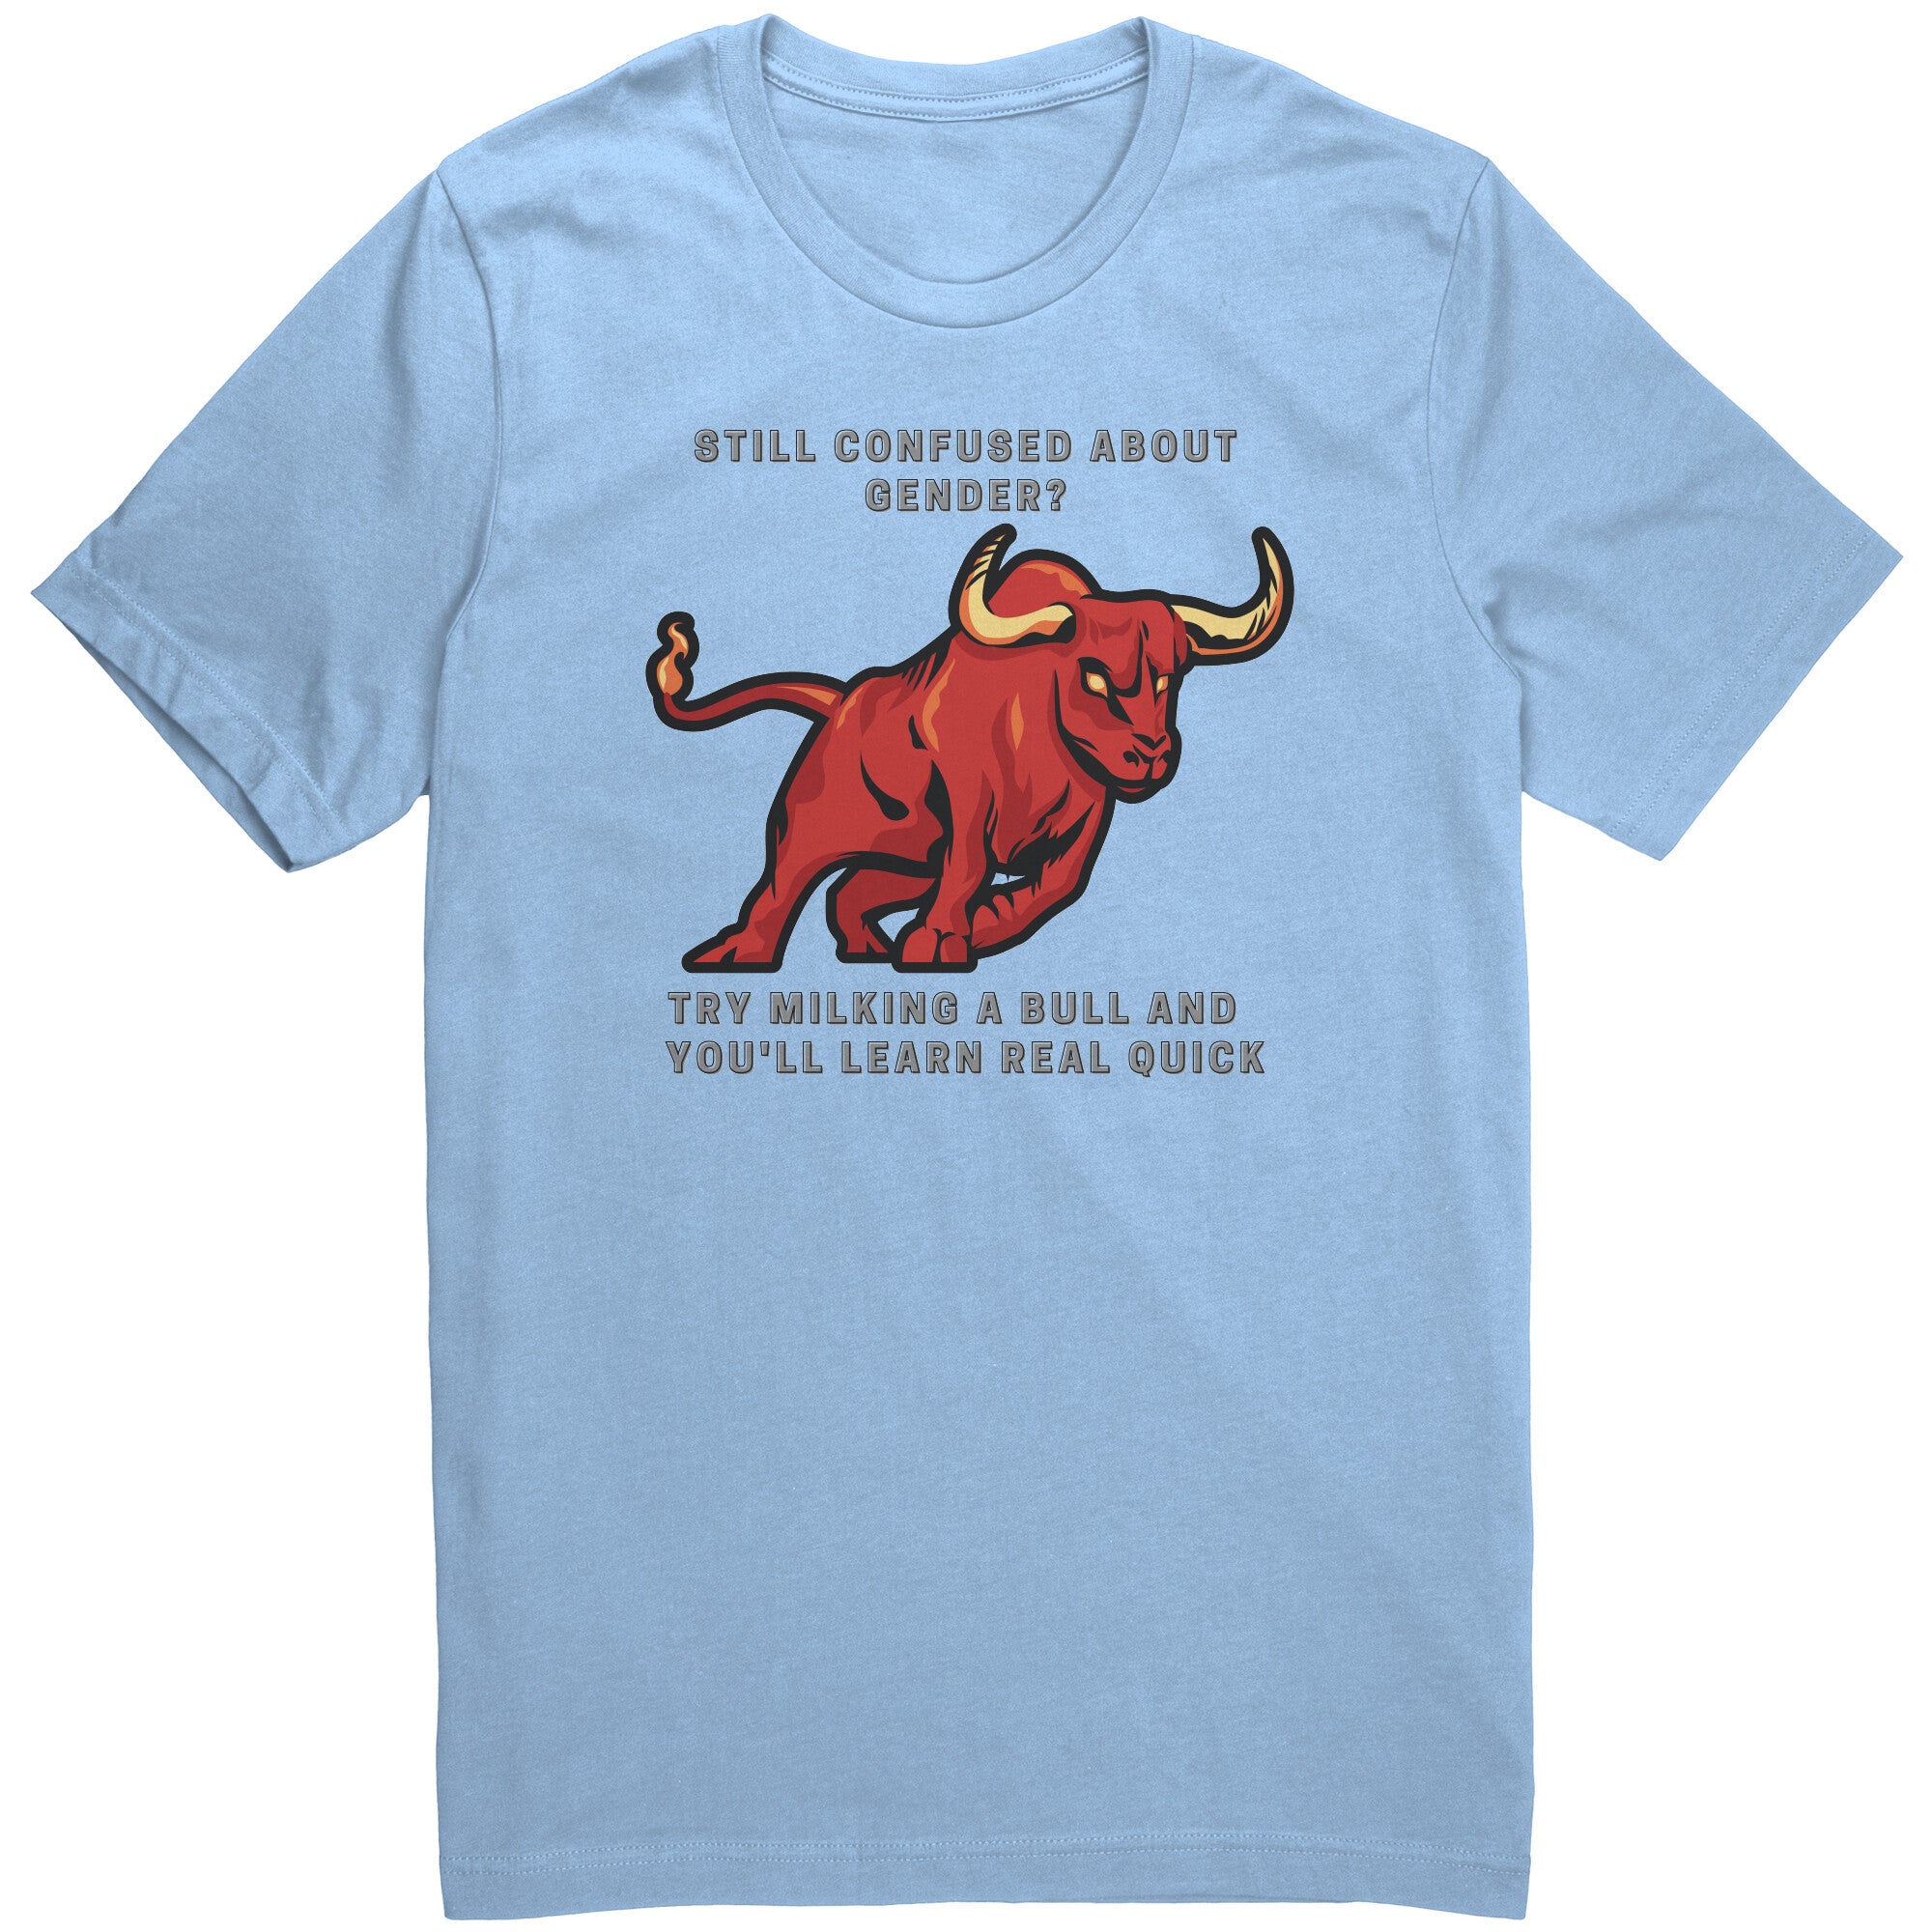 Confused About Gender Funny Bull T-Shirt Unisex Politics Tee Sarcastic TShirt light blue